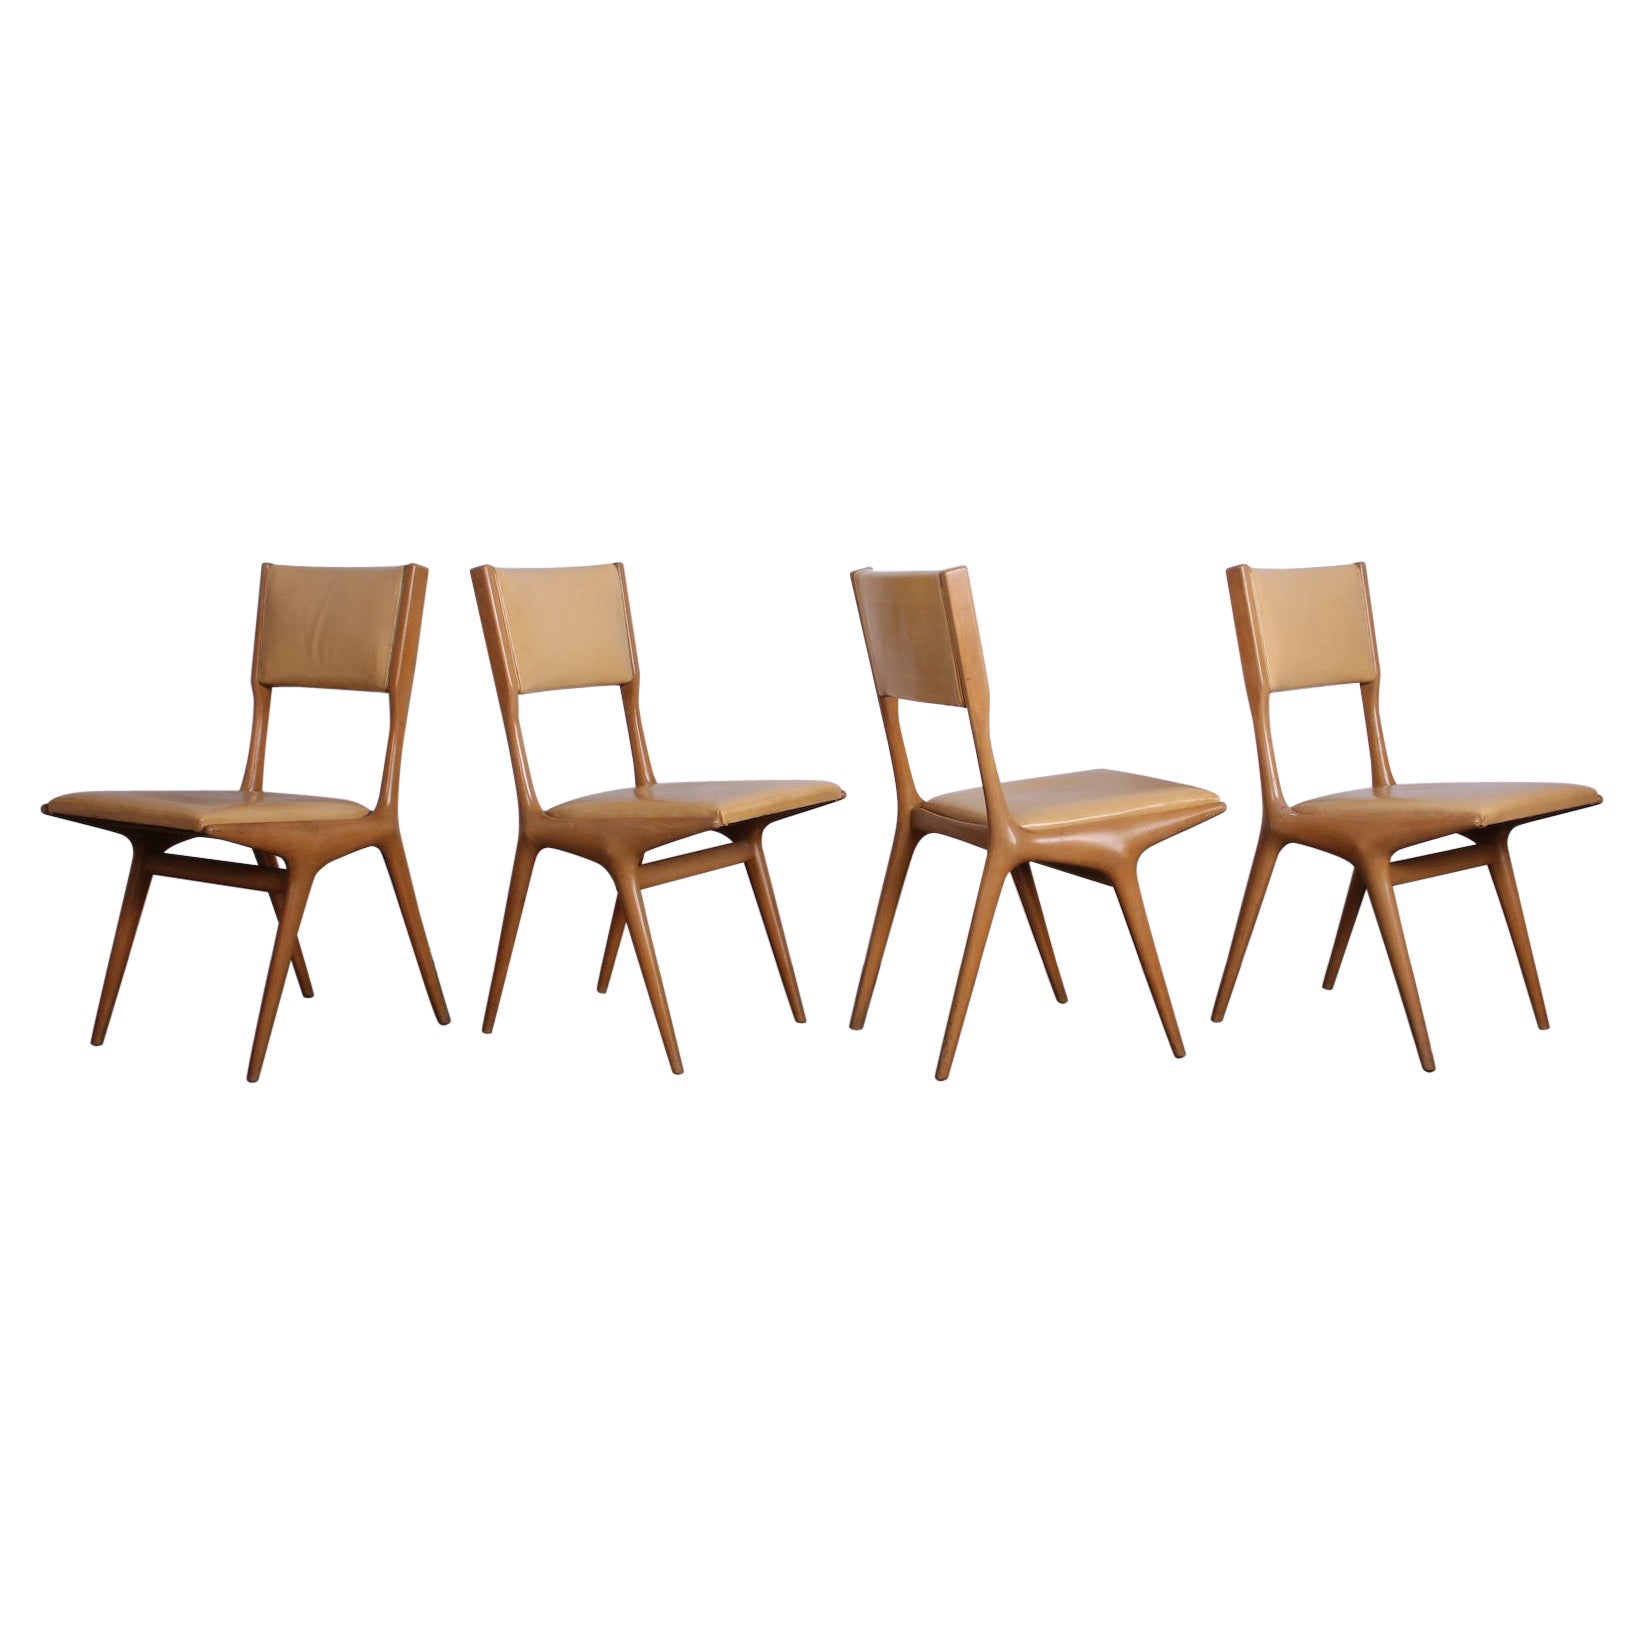 Four Carlo de Carli Chairs for Singer and Sons